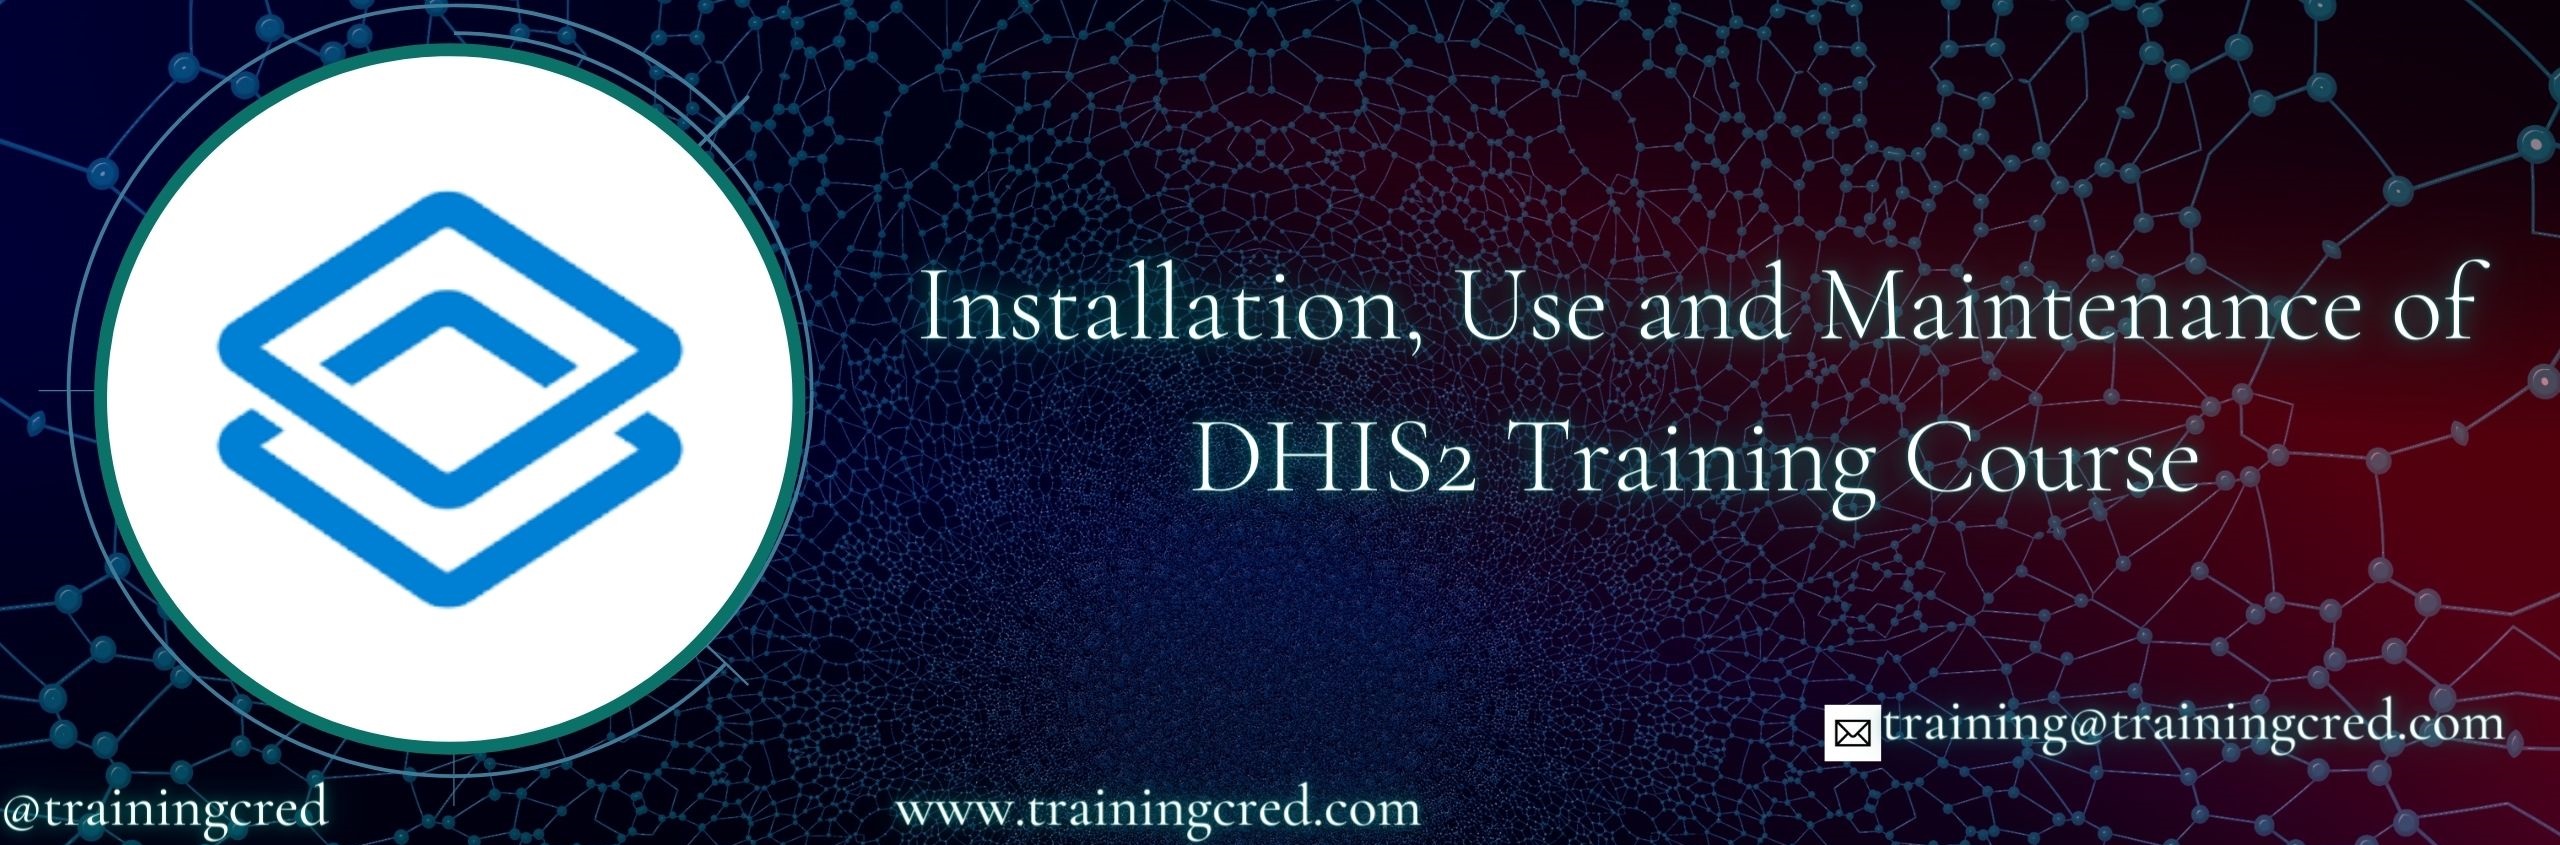 Installation, Use and Maintenance of DHIS2 Training